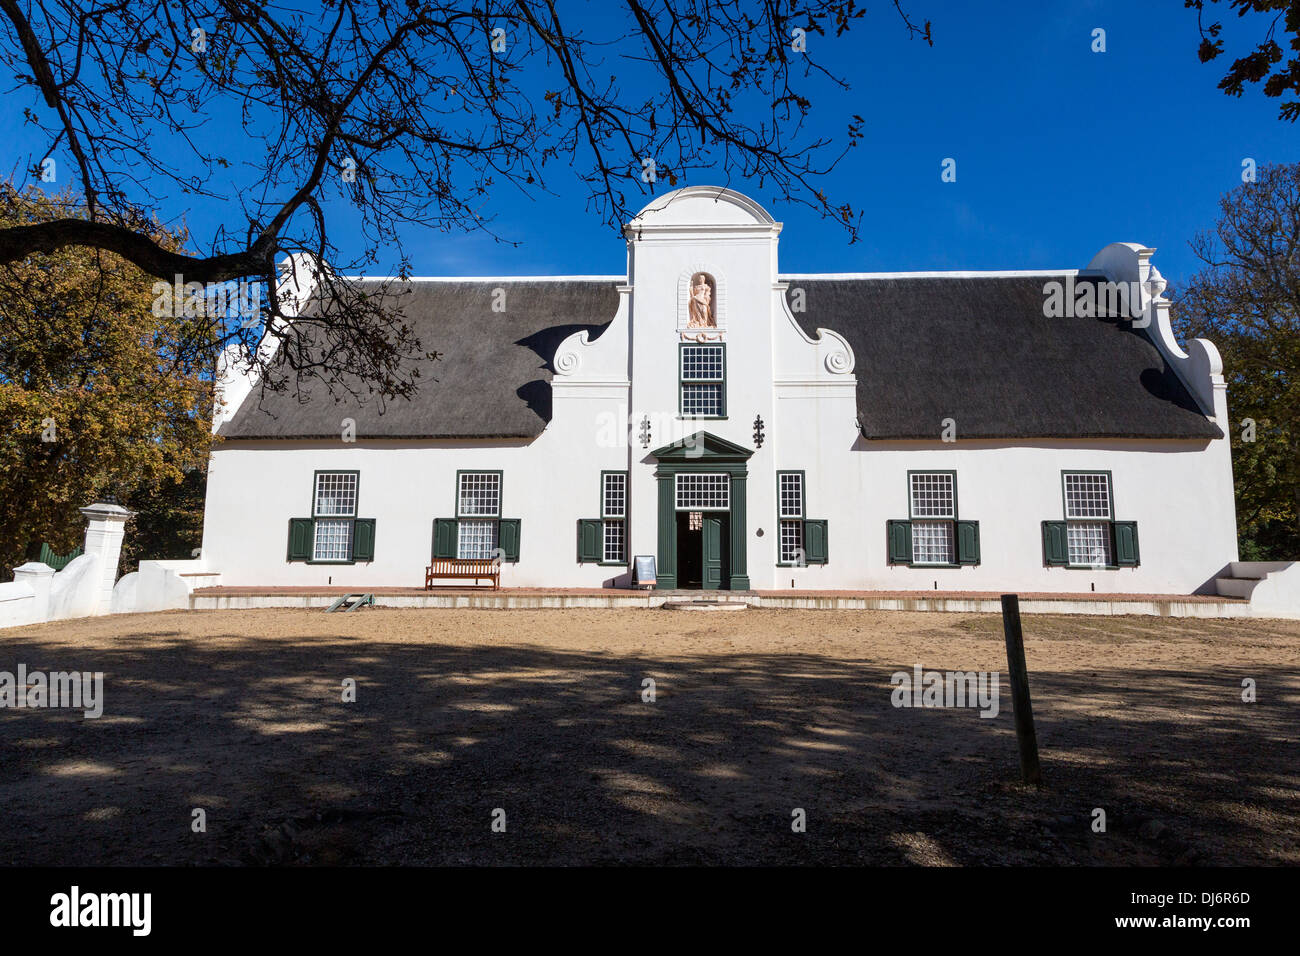 South Africa. Groot Constantia, oldest wine estate in South Africa, founded 1685. Stock Photo